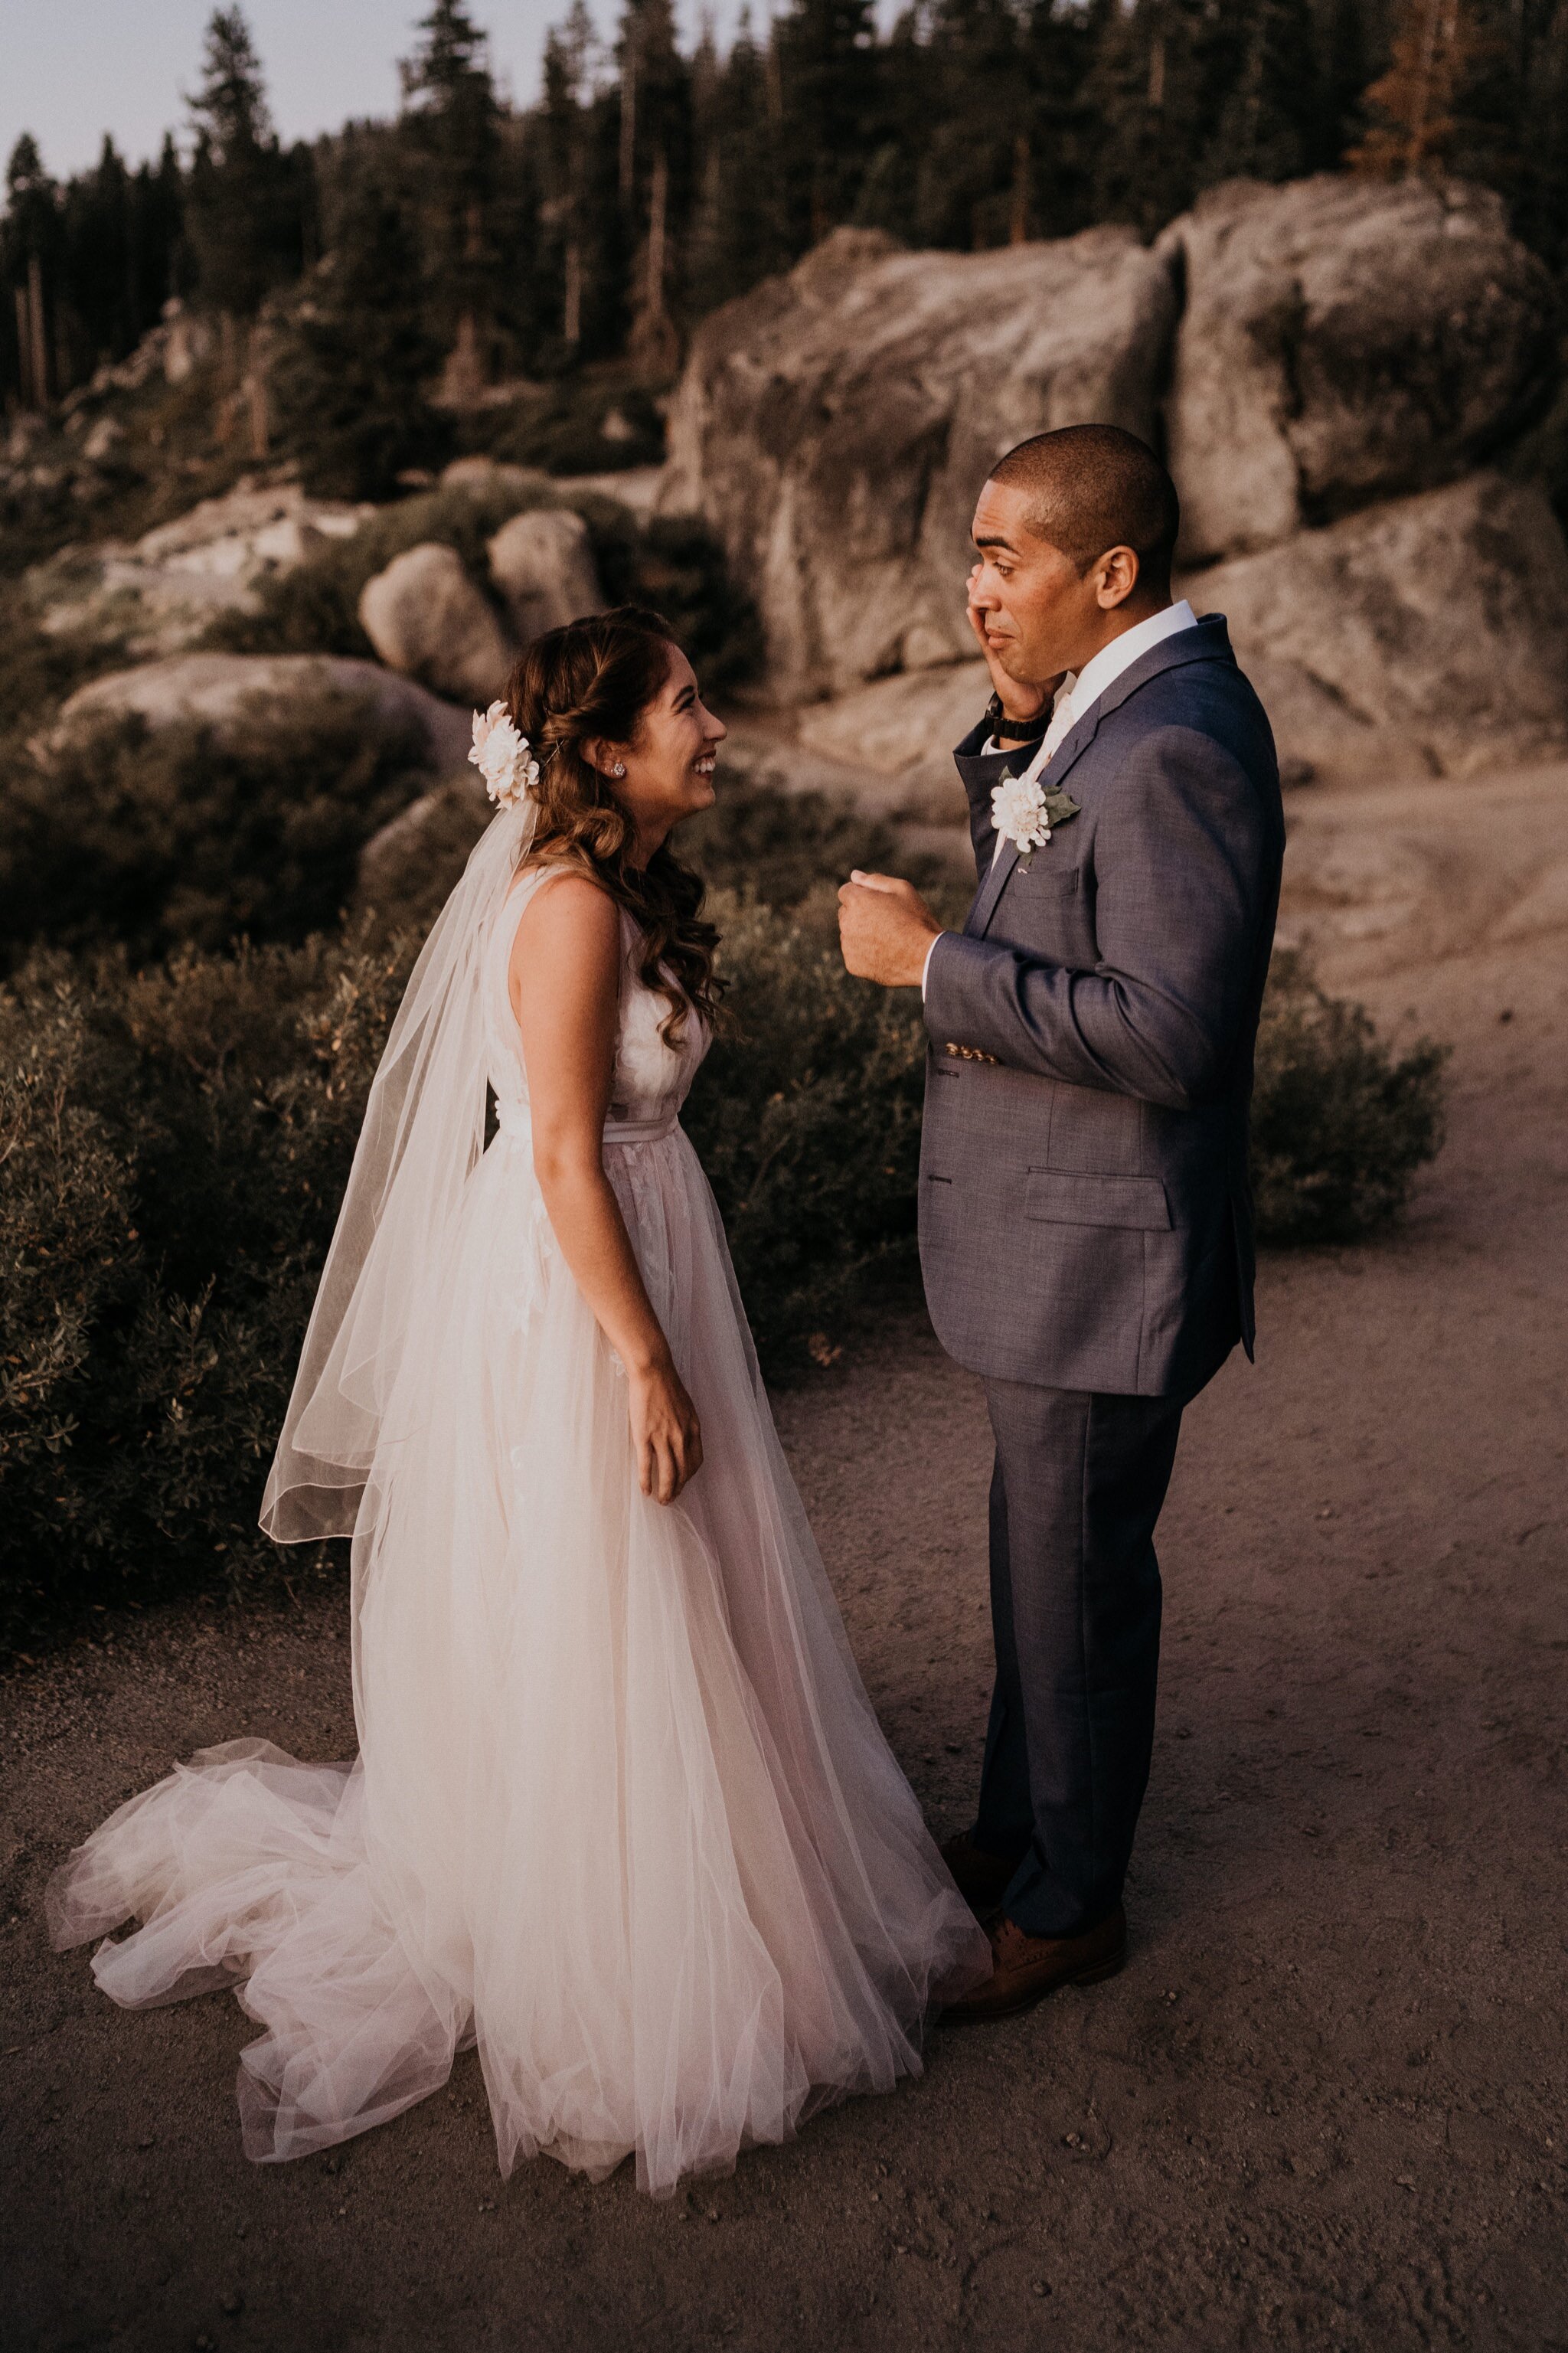 Emotional First look photos of bride and groom crying on their adventure elopement at Yosemite National Park Glacier Point